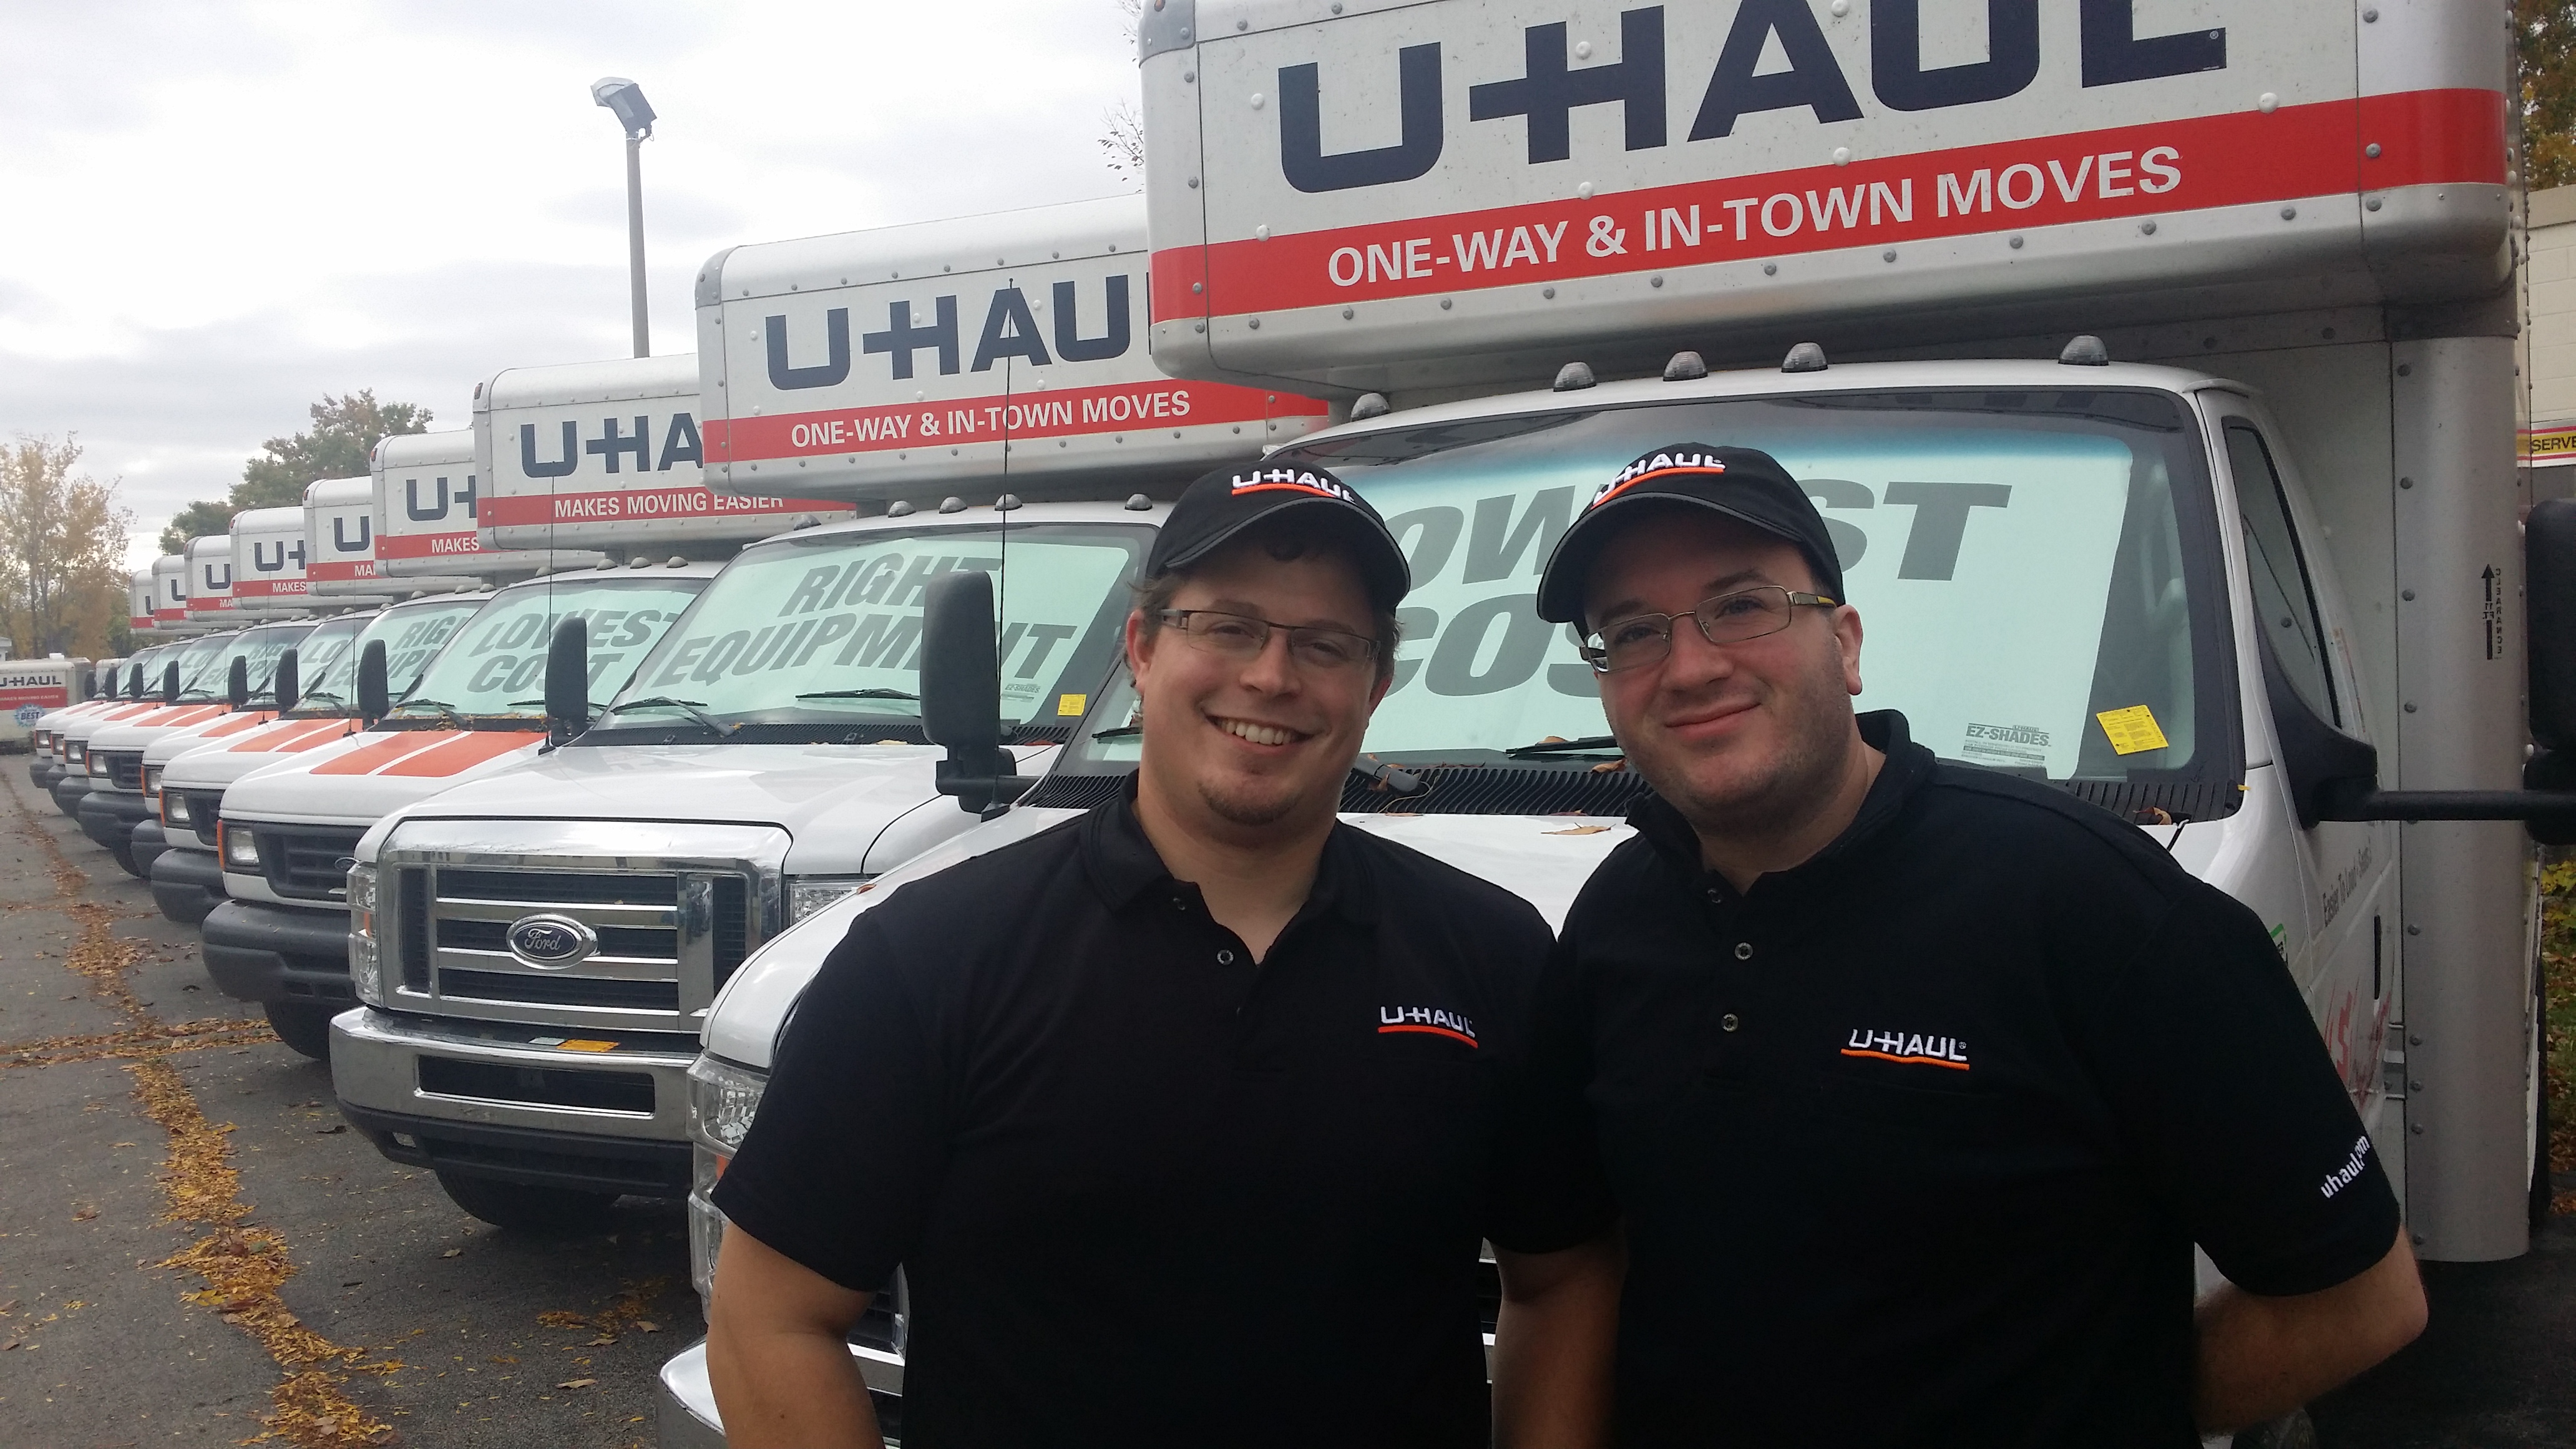 Bryan and Kevin are ready to help with your moving and storage needs.